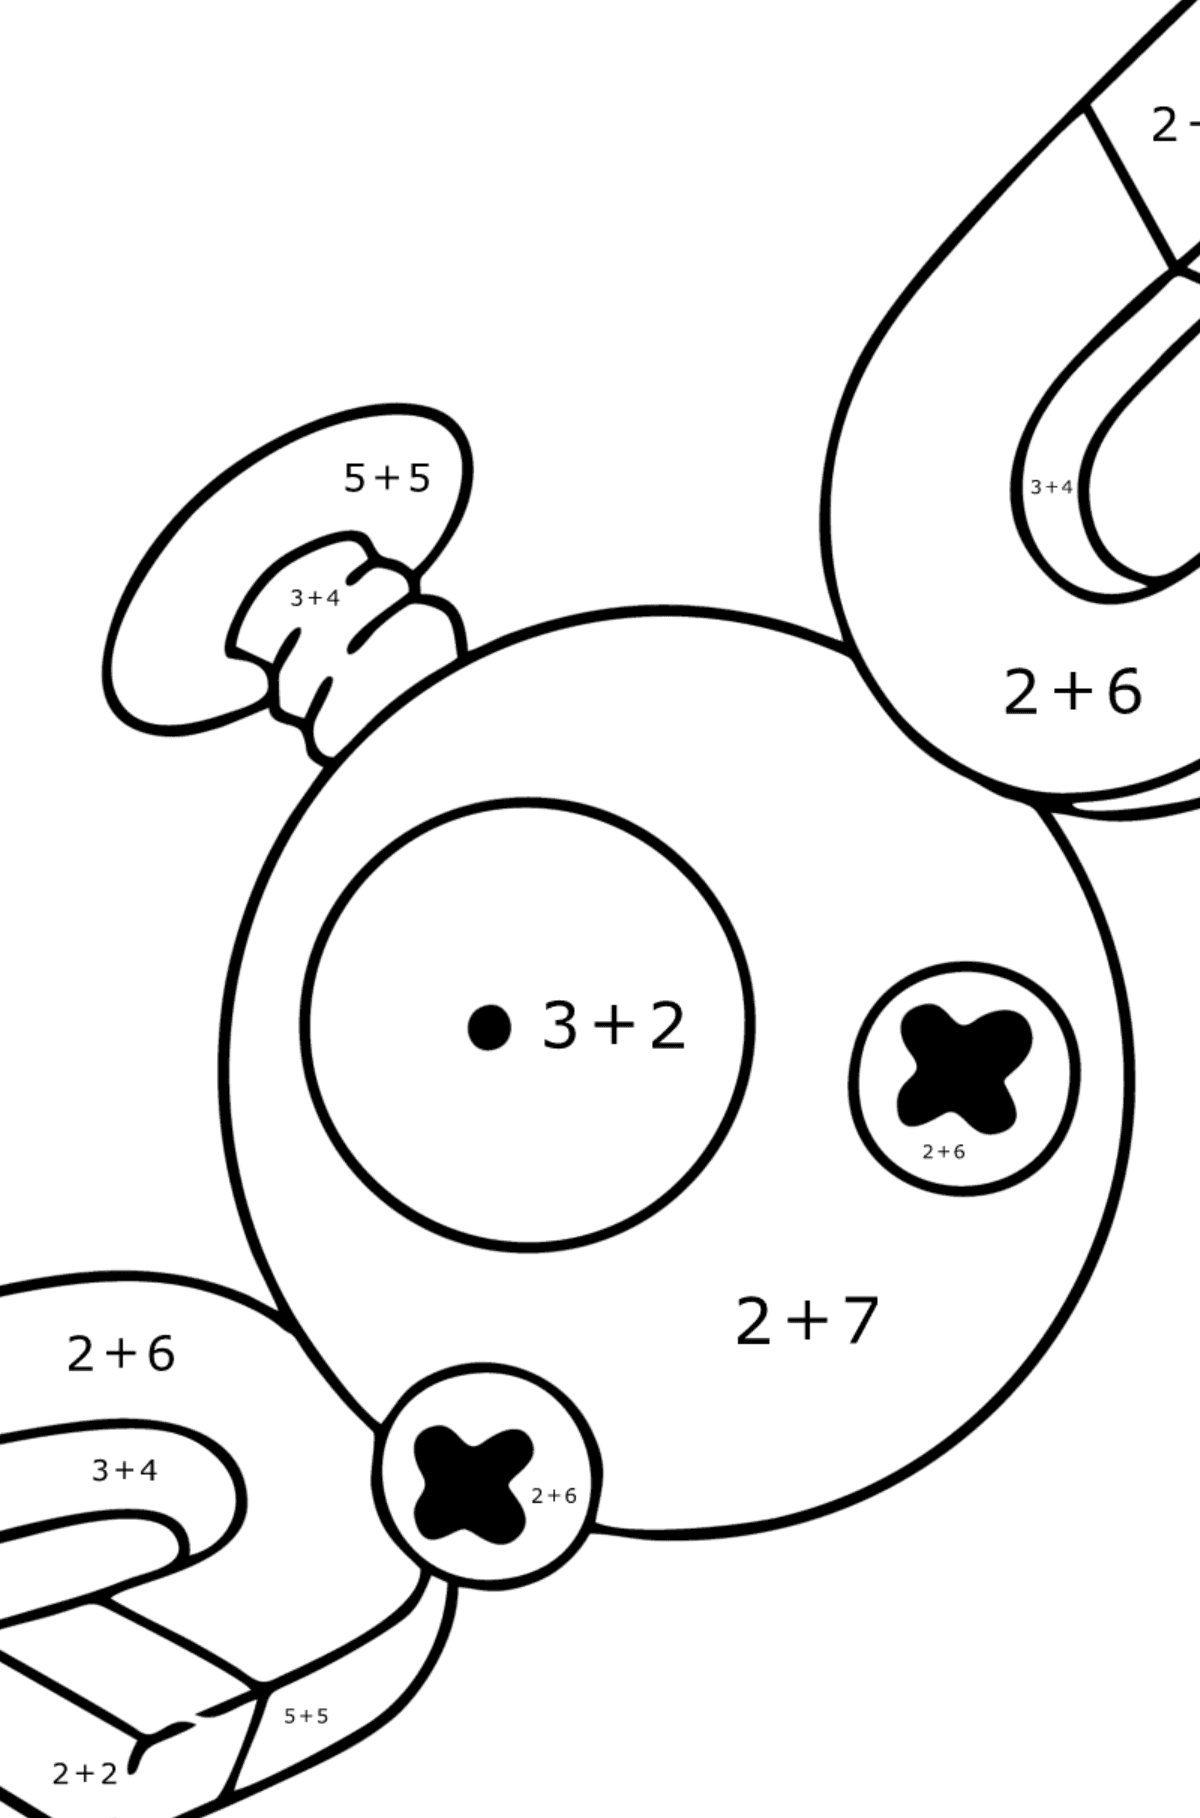 Coloring page Pokémon Go Magnemite - Math Coloring - Addition for Kids